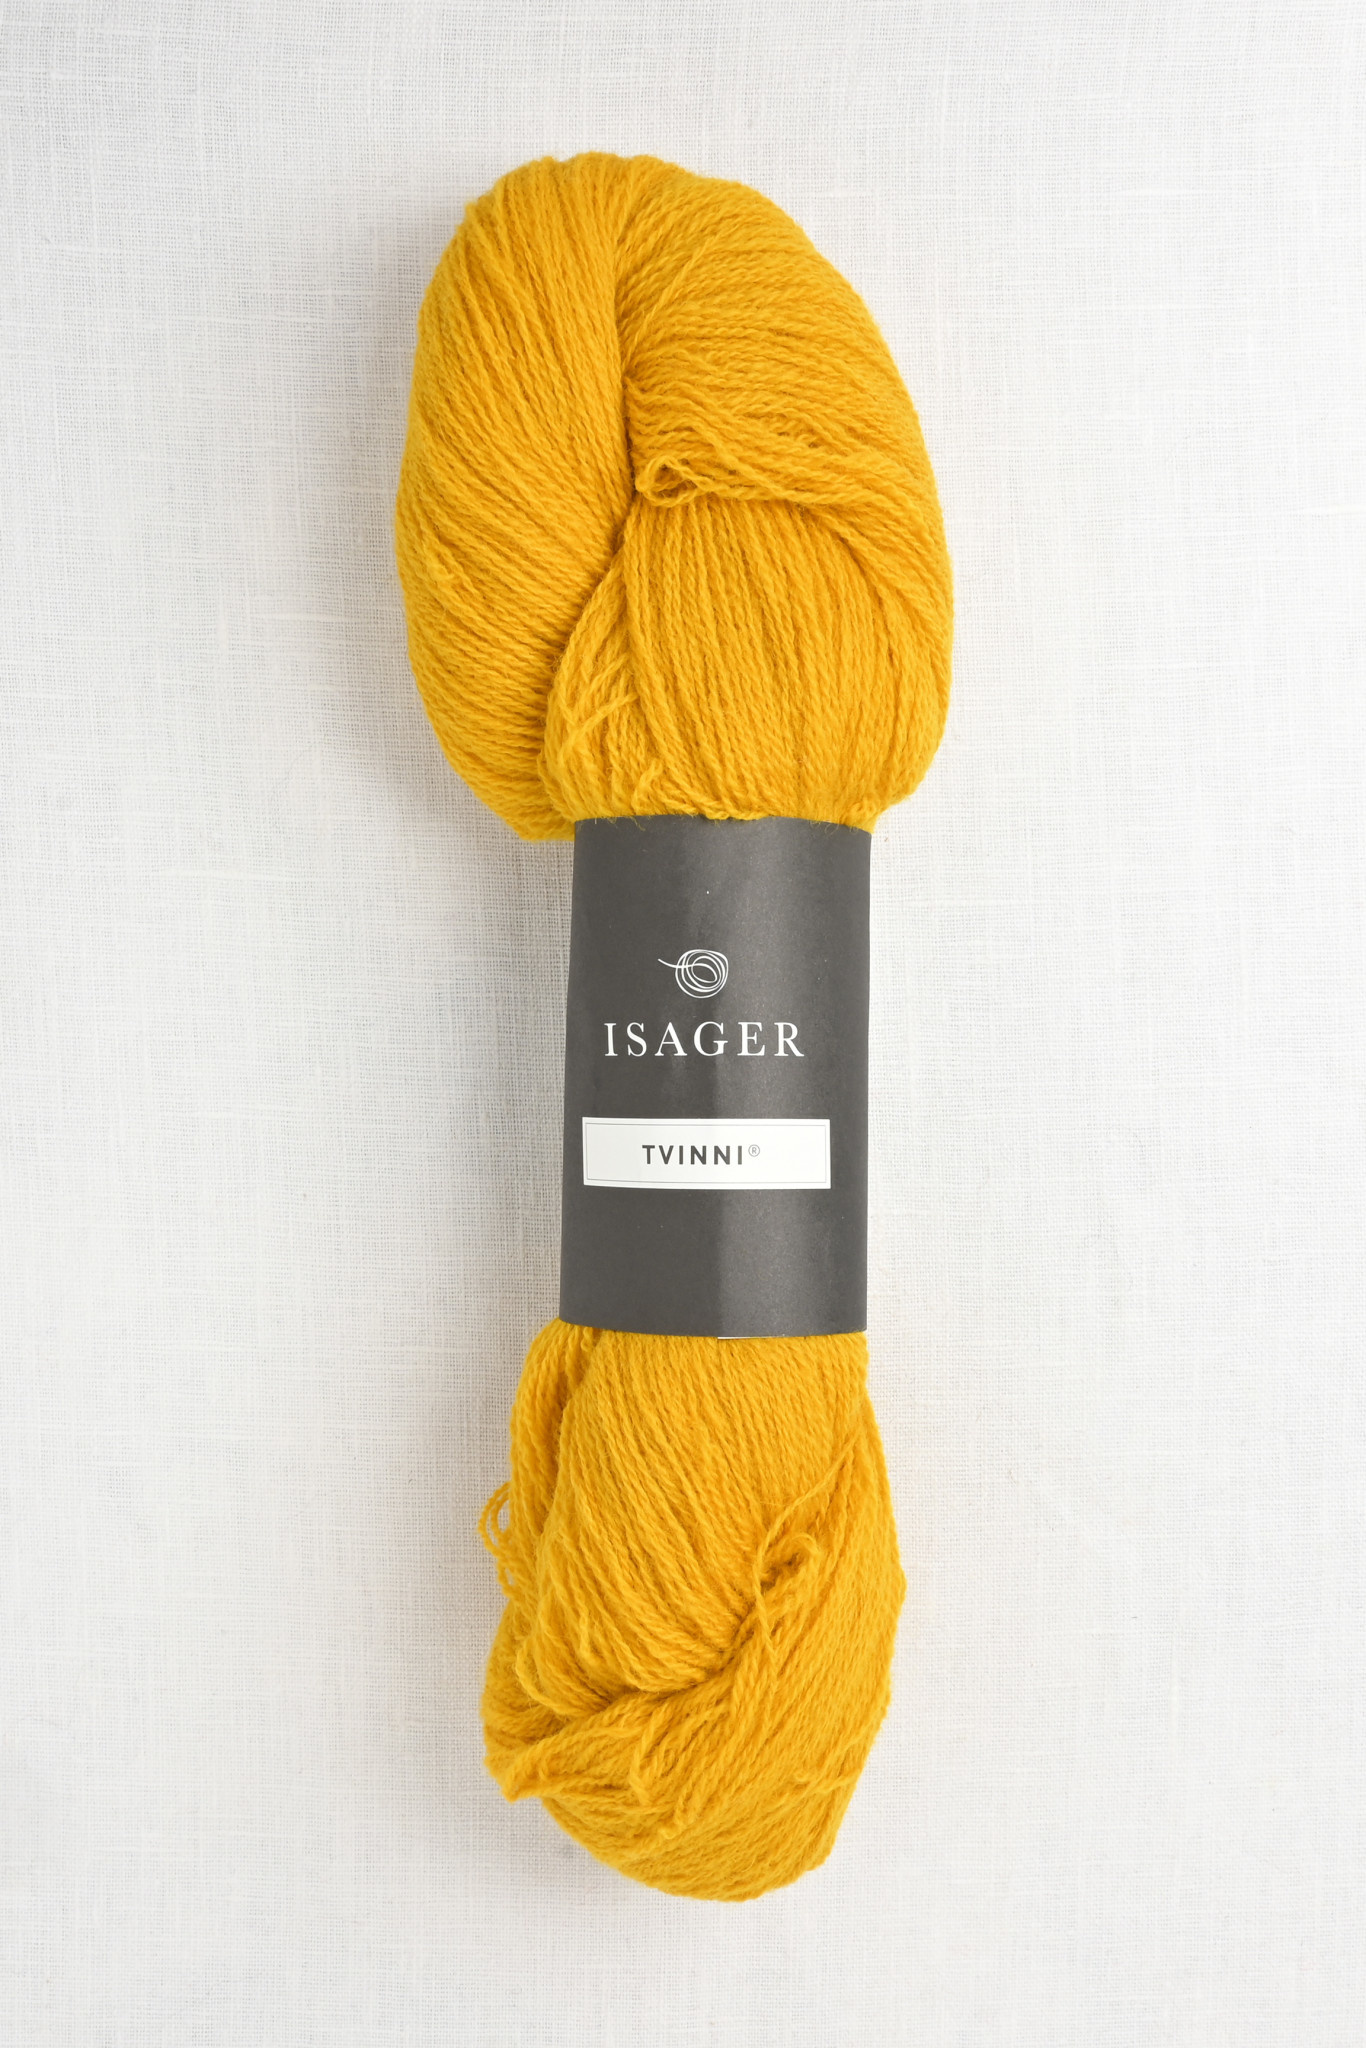 deformation verden Fugtighed Isager Tvinni 22 Solar - Wool and Company Fine Yarn